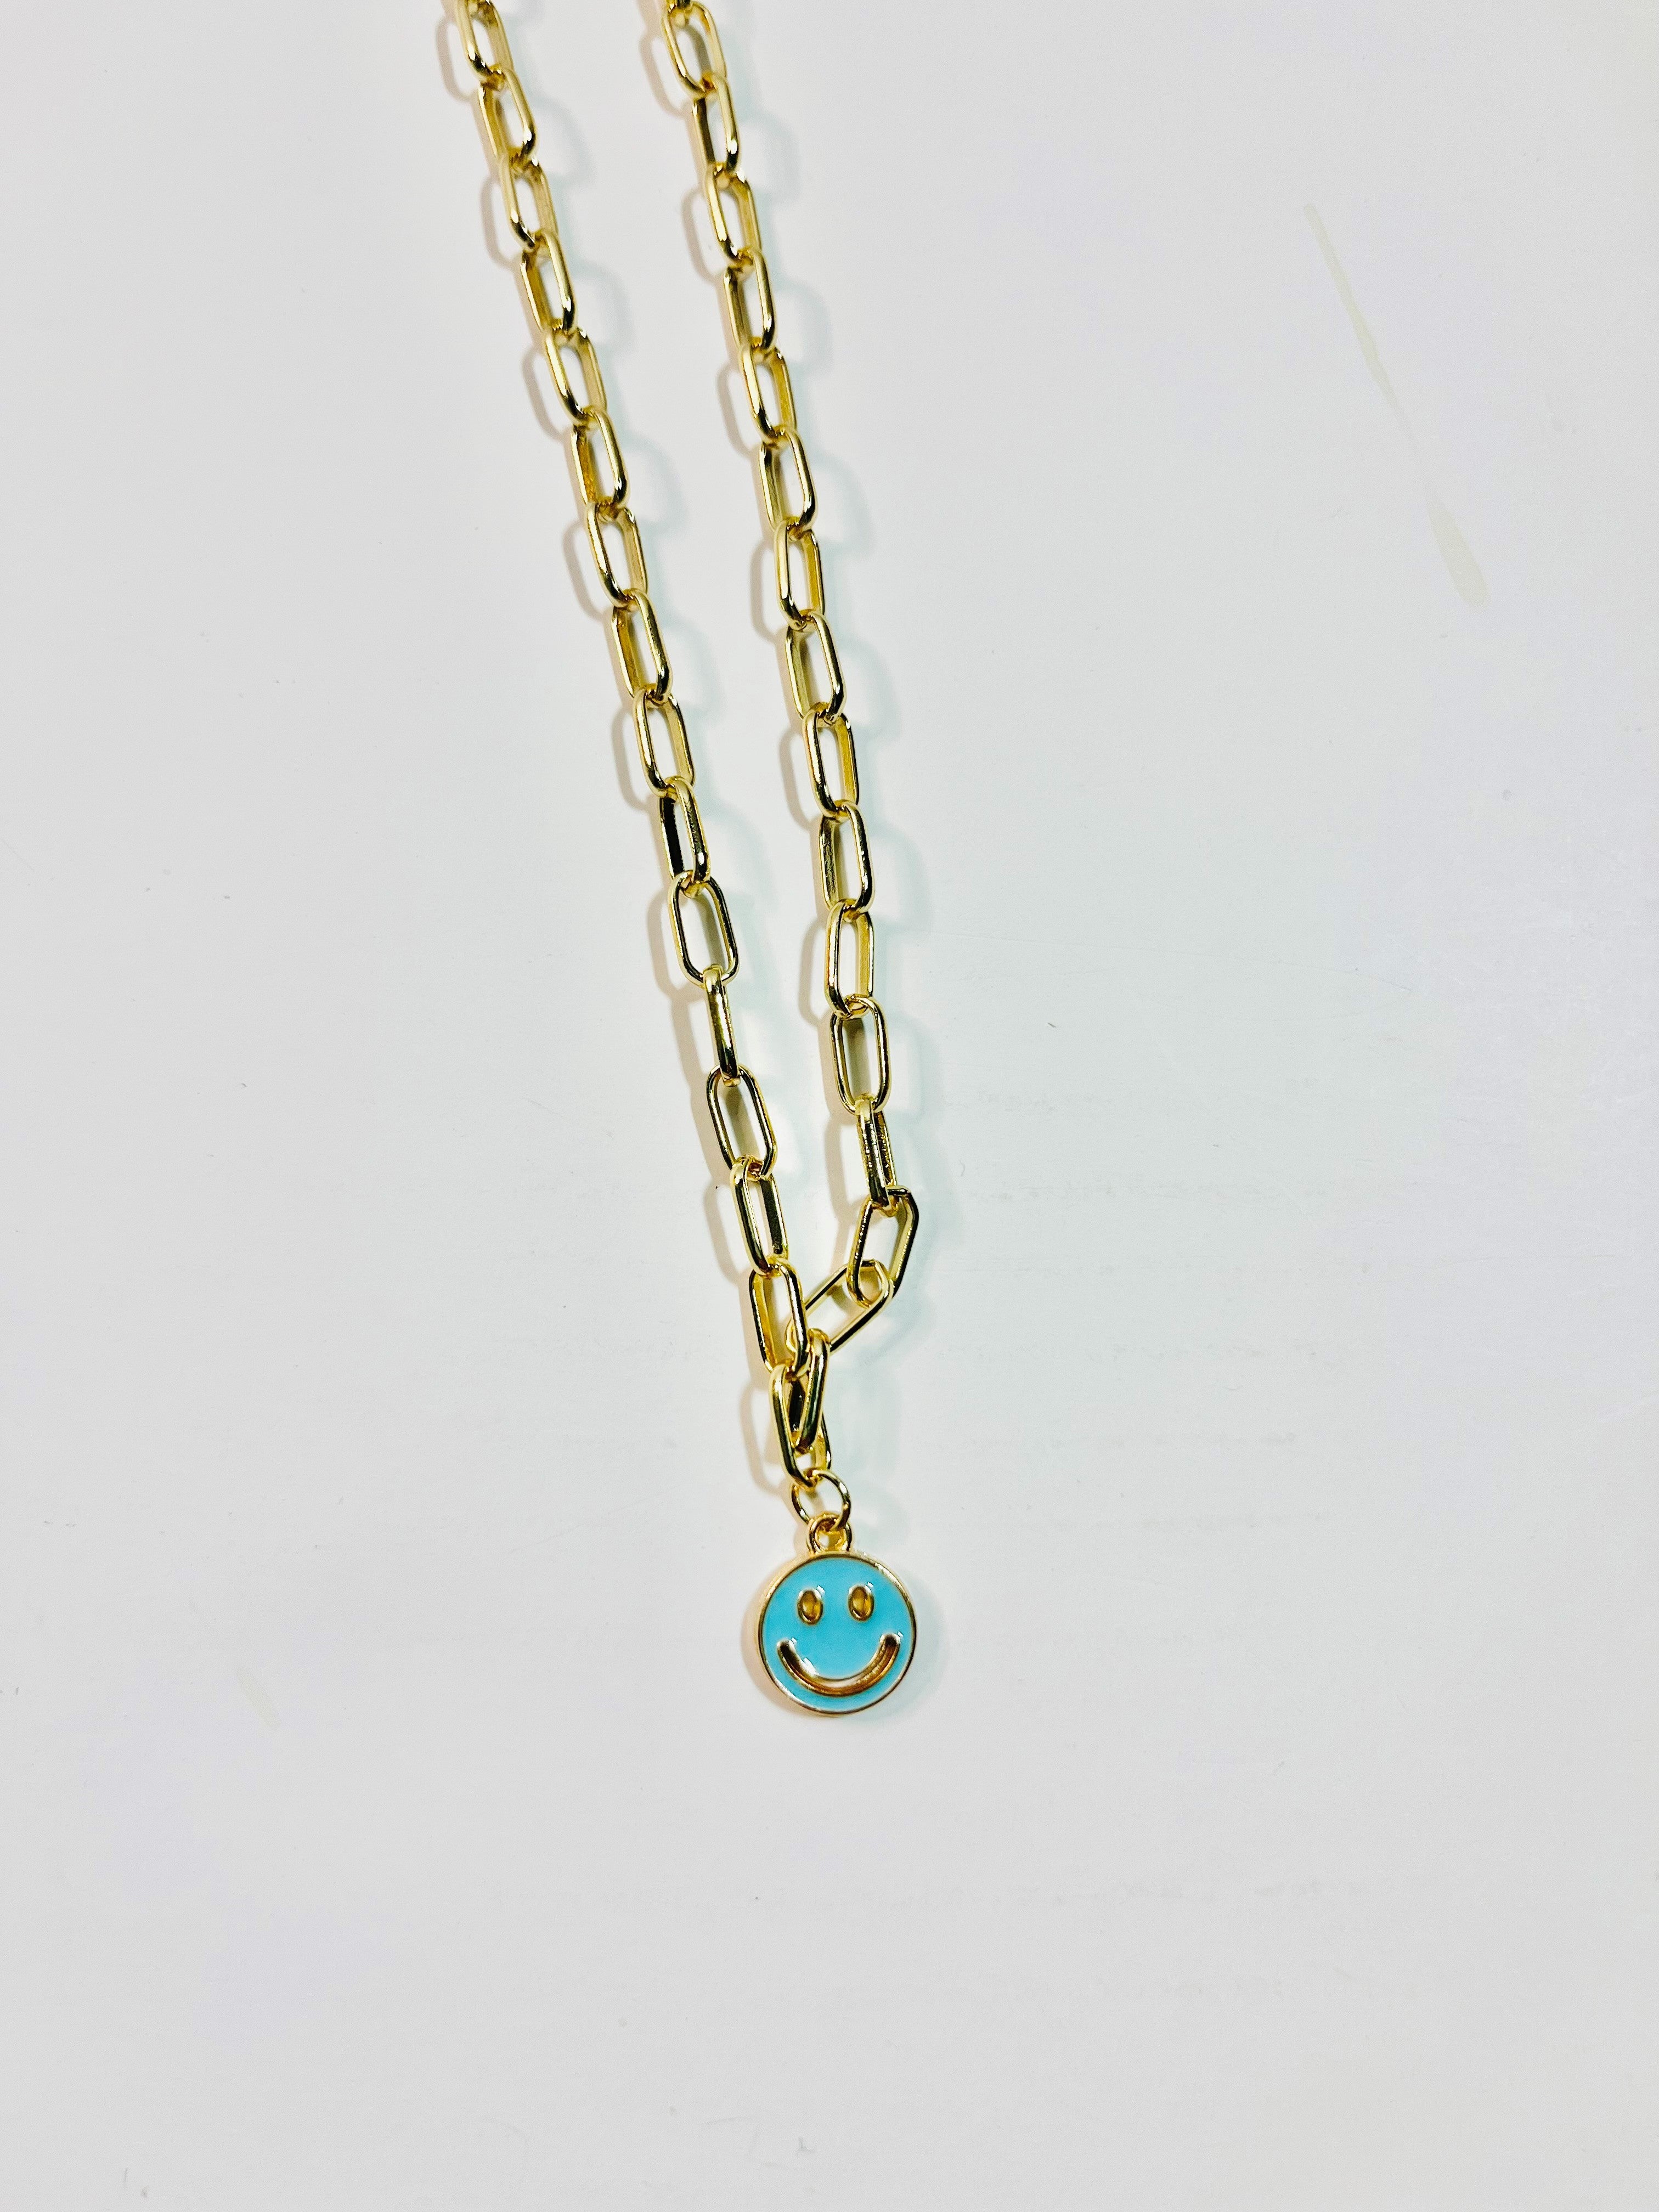 Little Smiley Face Necklace